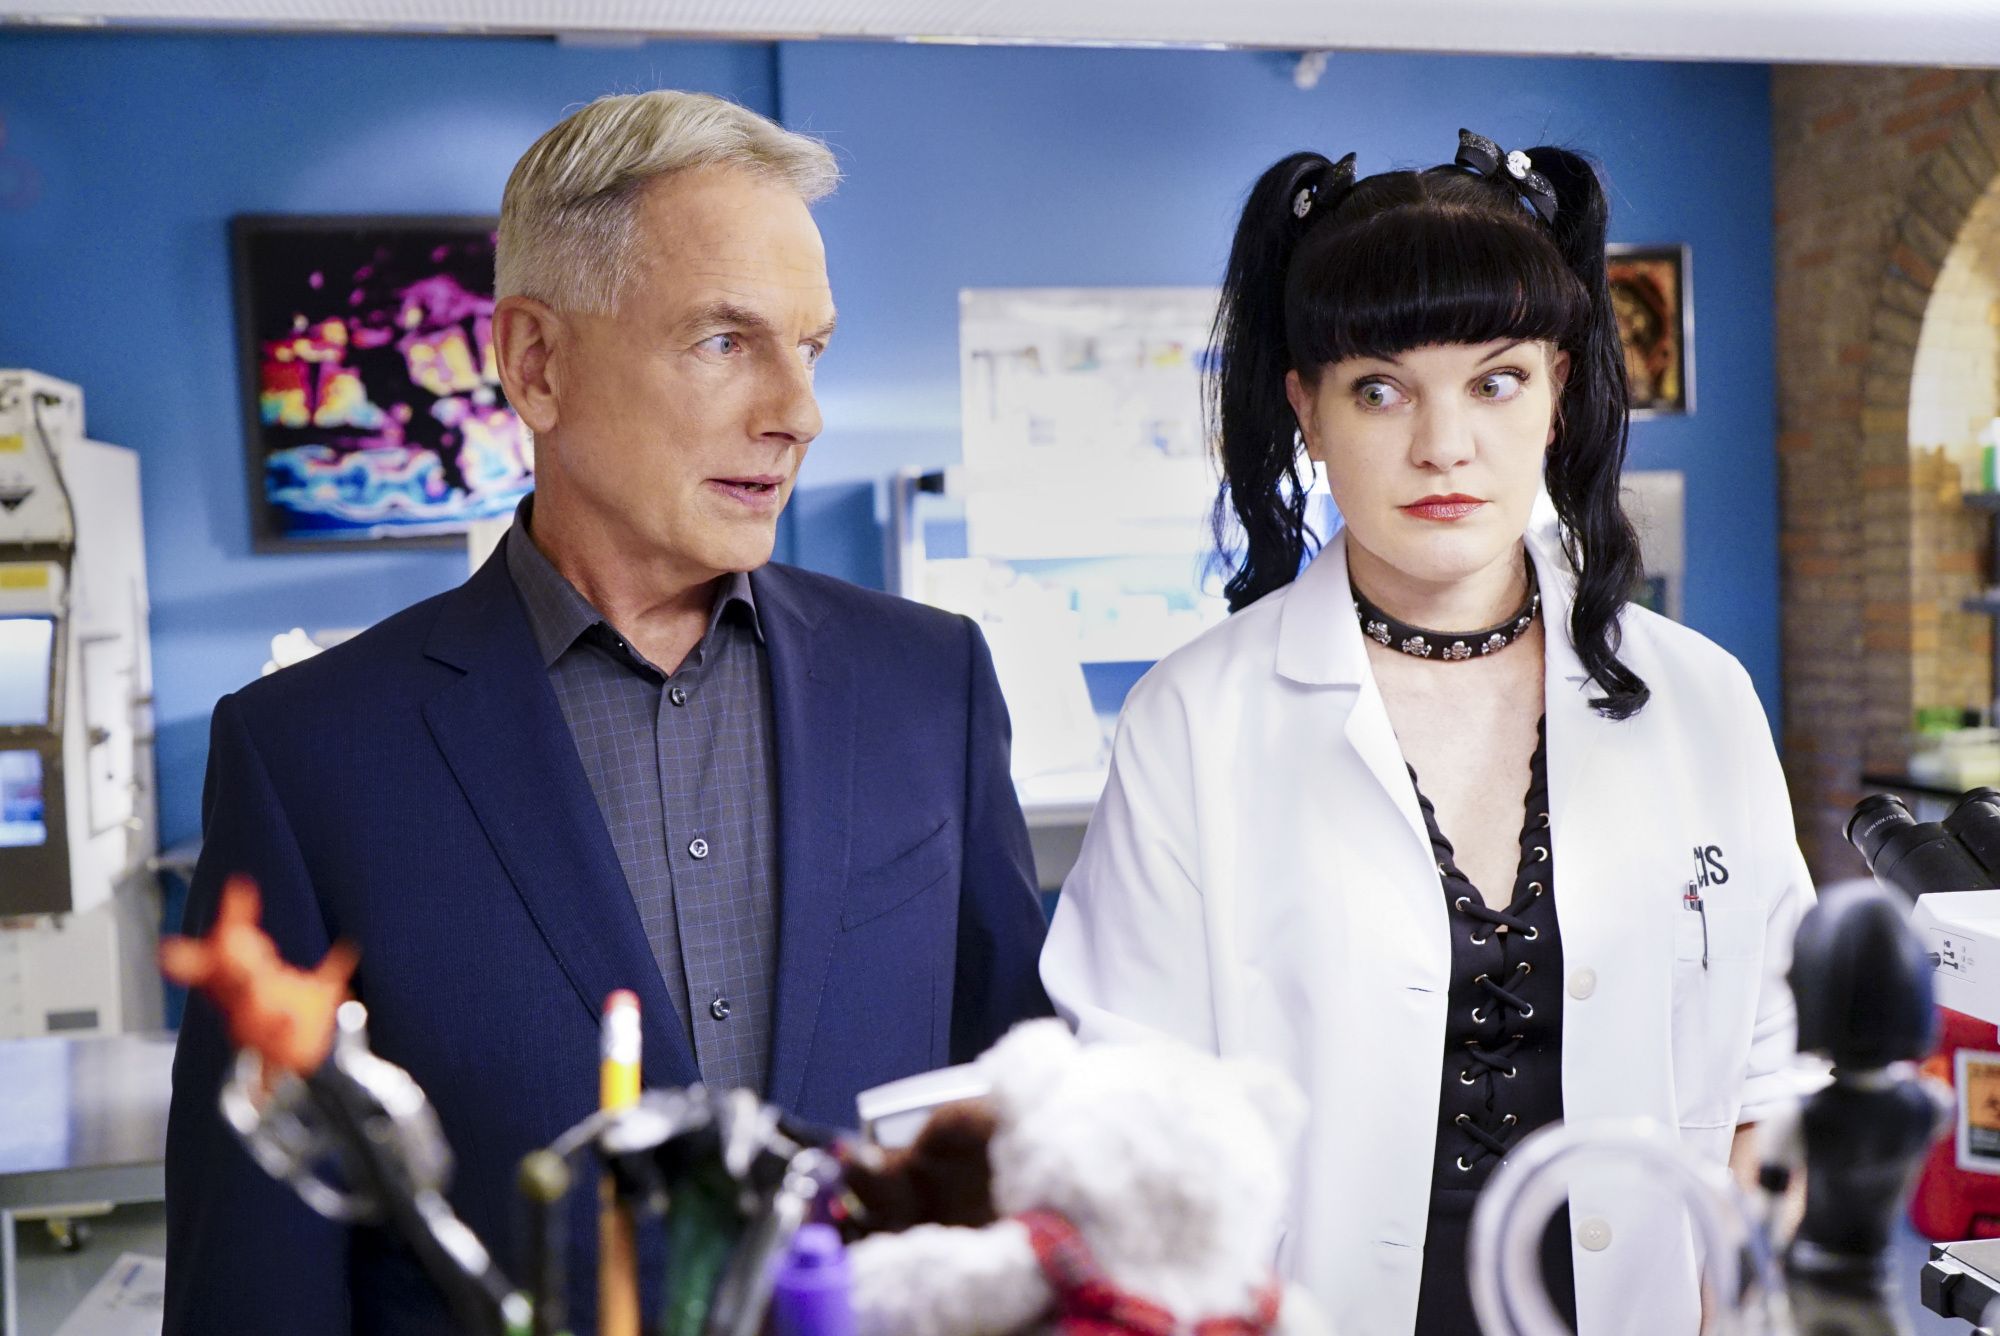 Mark Hamon as Gibbs and Pauley Perrette as Abby Scuito on an episode of "NCIS" on August 12, 2016, in Los Angeles | Photo: Sonja Flemming/CBS/Getty Images